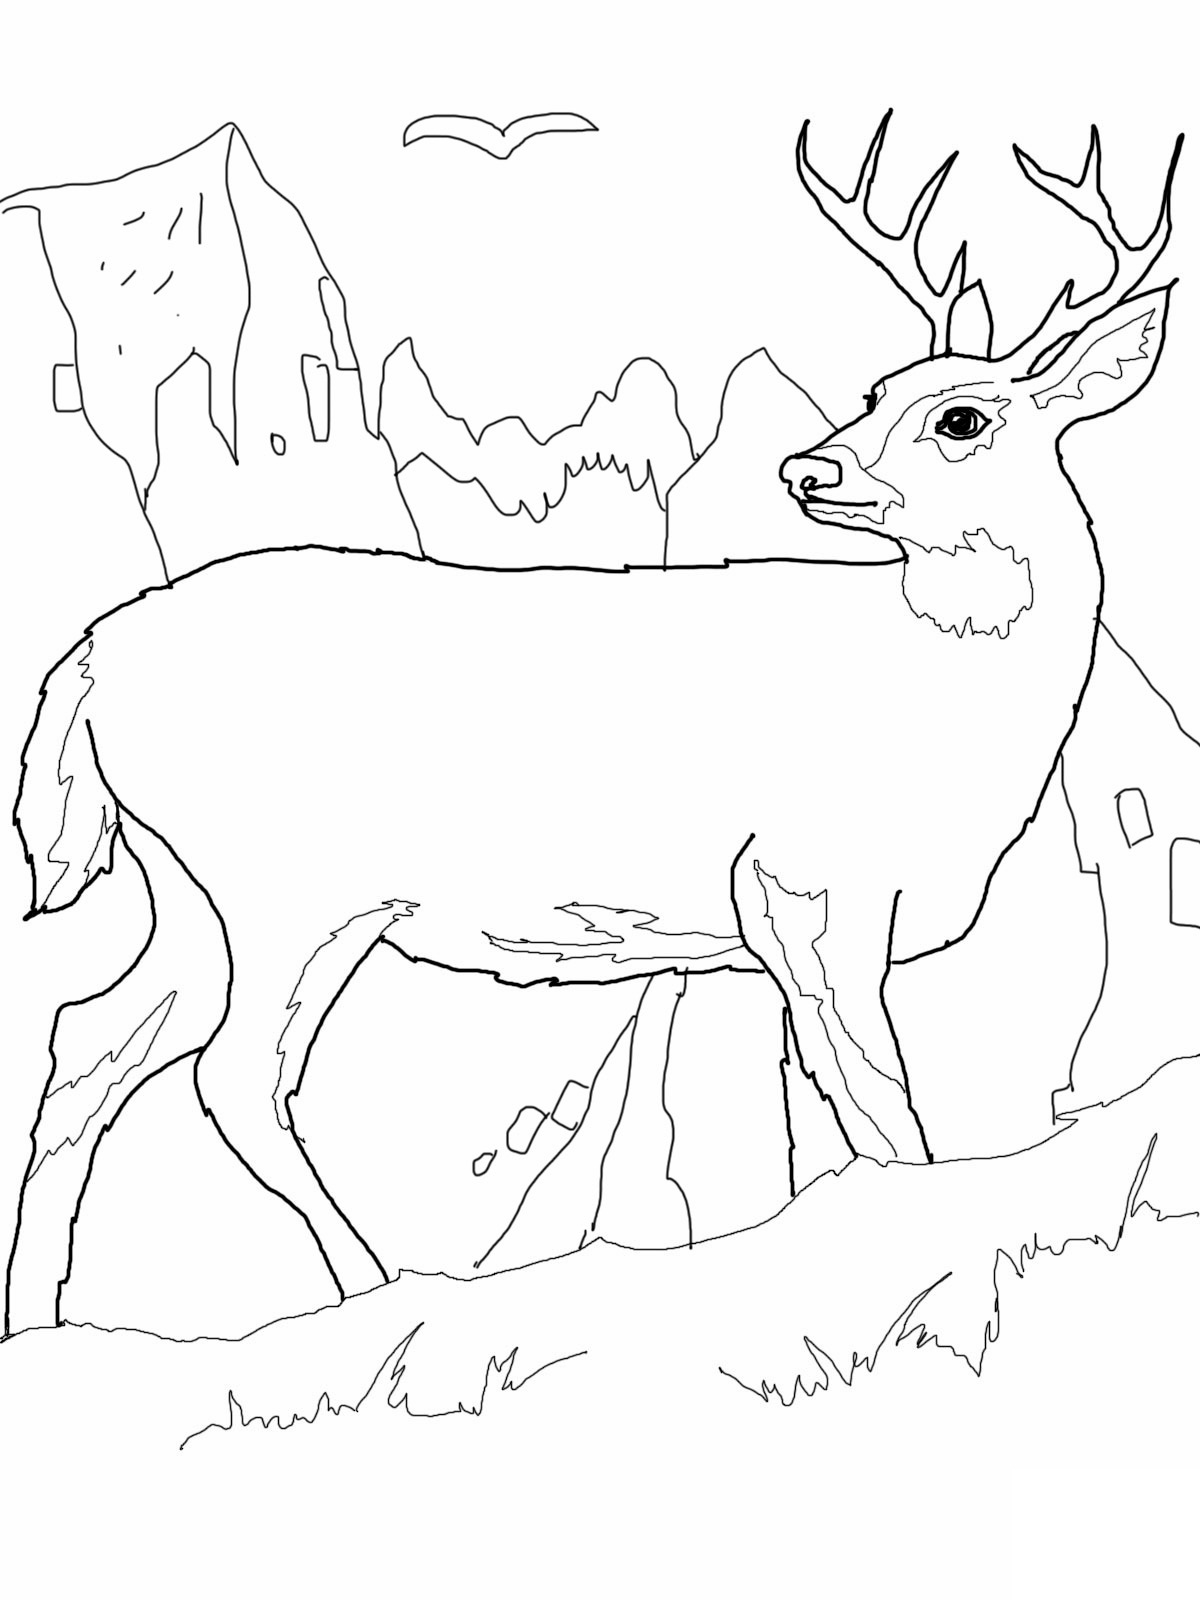 Download Free Printable Deer Coloring Pages For Kids